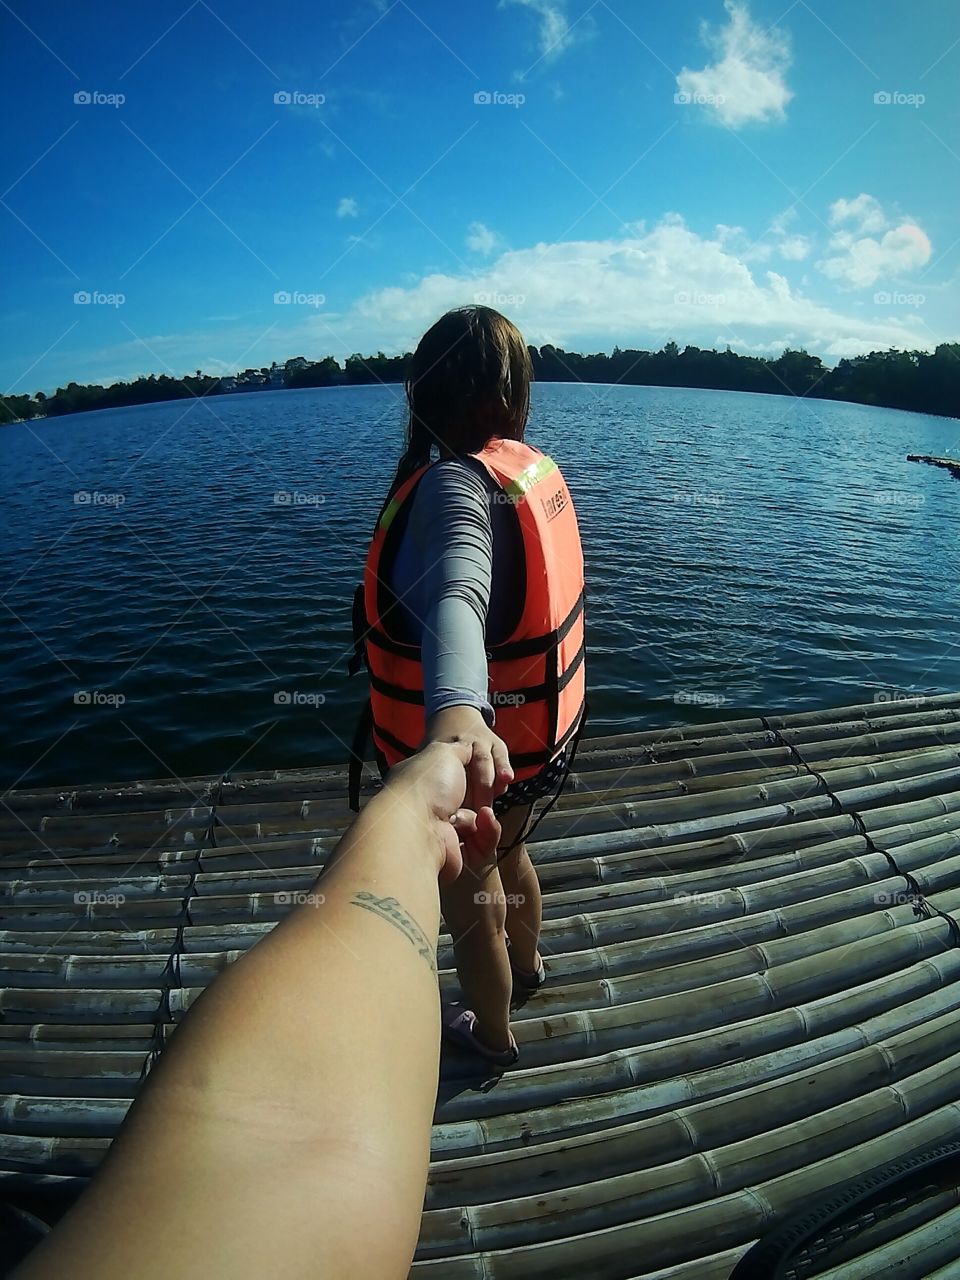 Hold my hand. Don't let go.